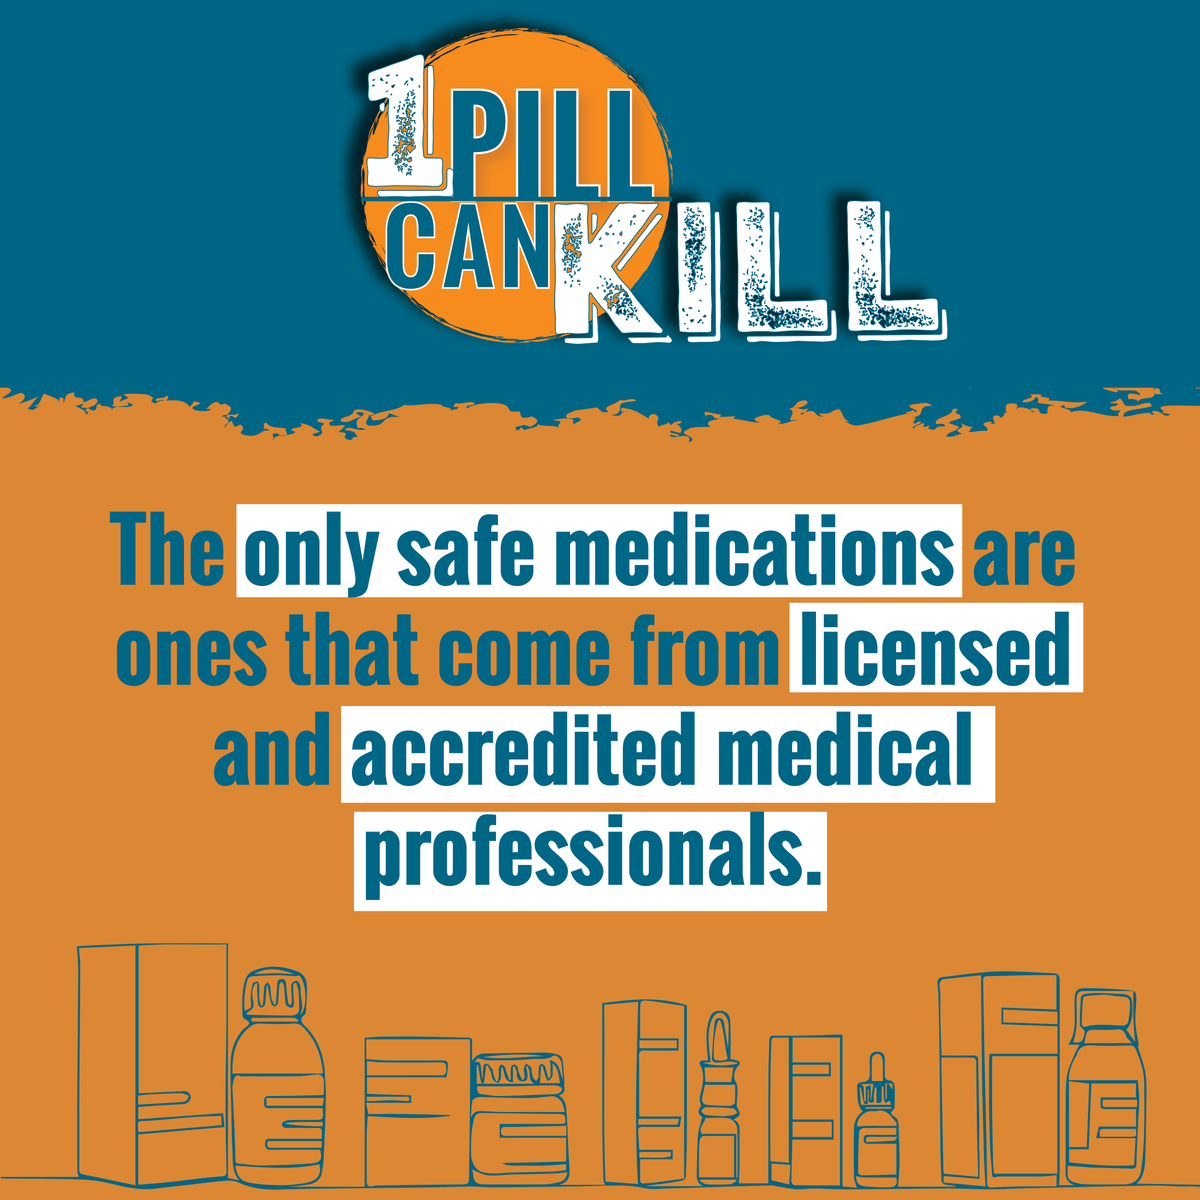 Pills purchased outside of a licensed pharmacy are illegal, dangerous, and potentially lethal. Learn more at ow.ly/X0ju50Qe9Cc #OnePillCanKill #CurbtheCrisis #FentanylAwareness